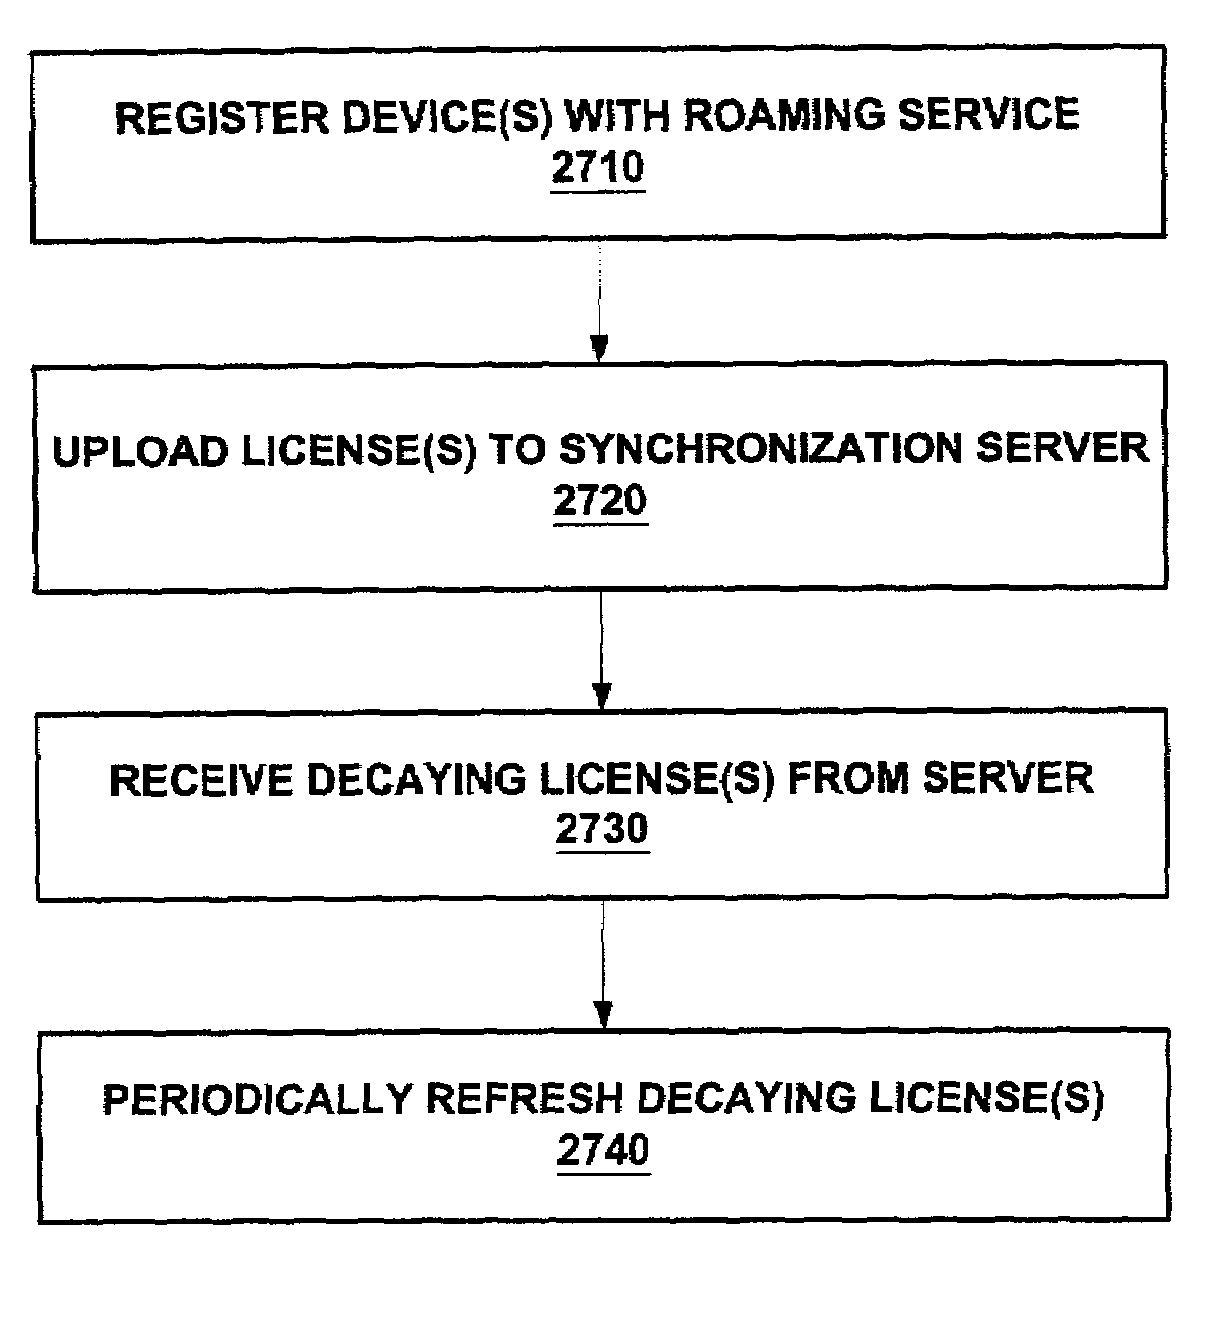 Enforcement architecture and method for digital rights management system for roaming a license to a plurality of user devices